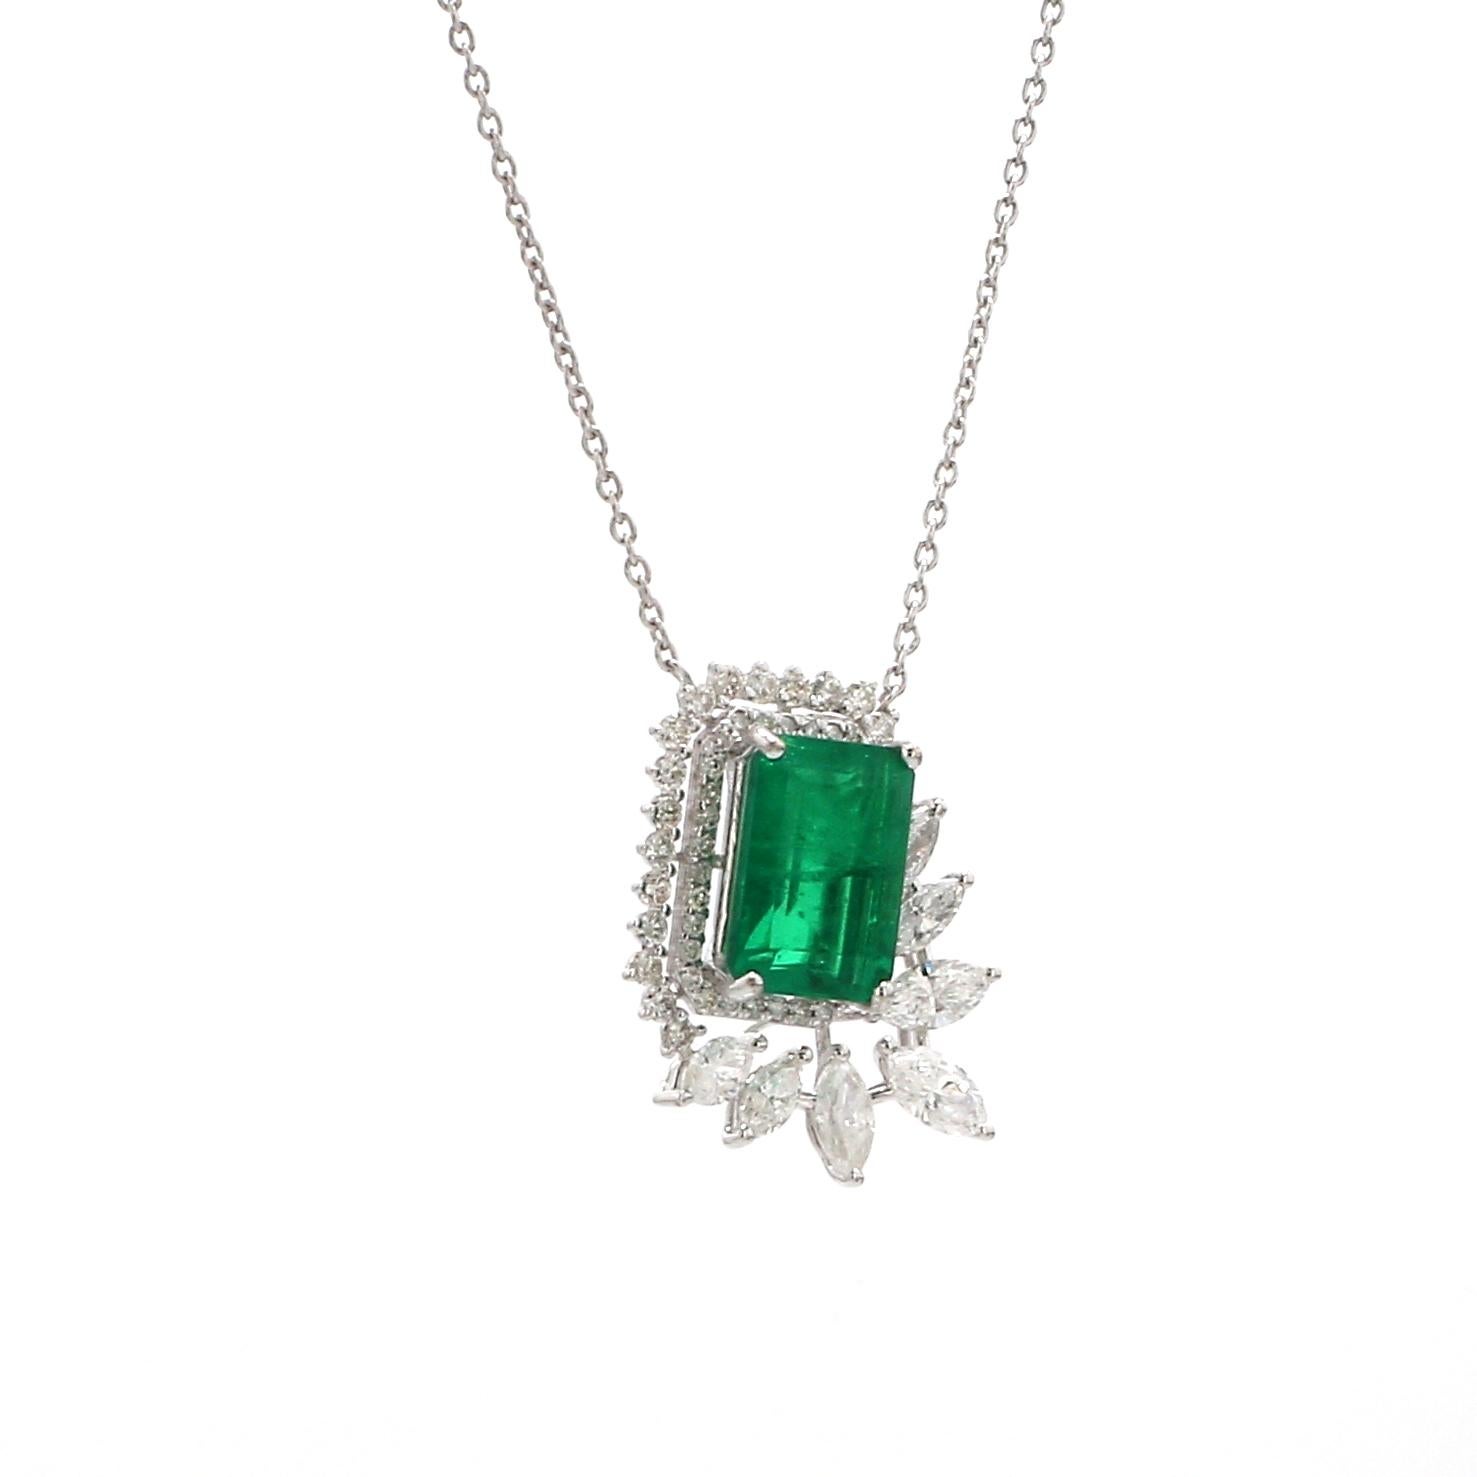 Introducing the exquisite Processed Gemstone Pendant Necklace, a truly unique and captivating piece of handmade fine jewelry. Meticulously crafted with utmost care and attention to detail, this necklace showcases a processed gemstone pendant,